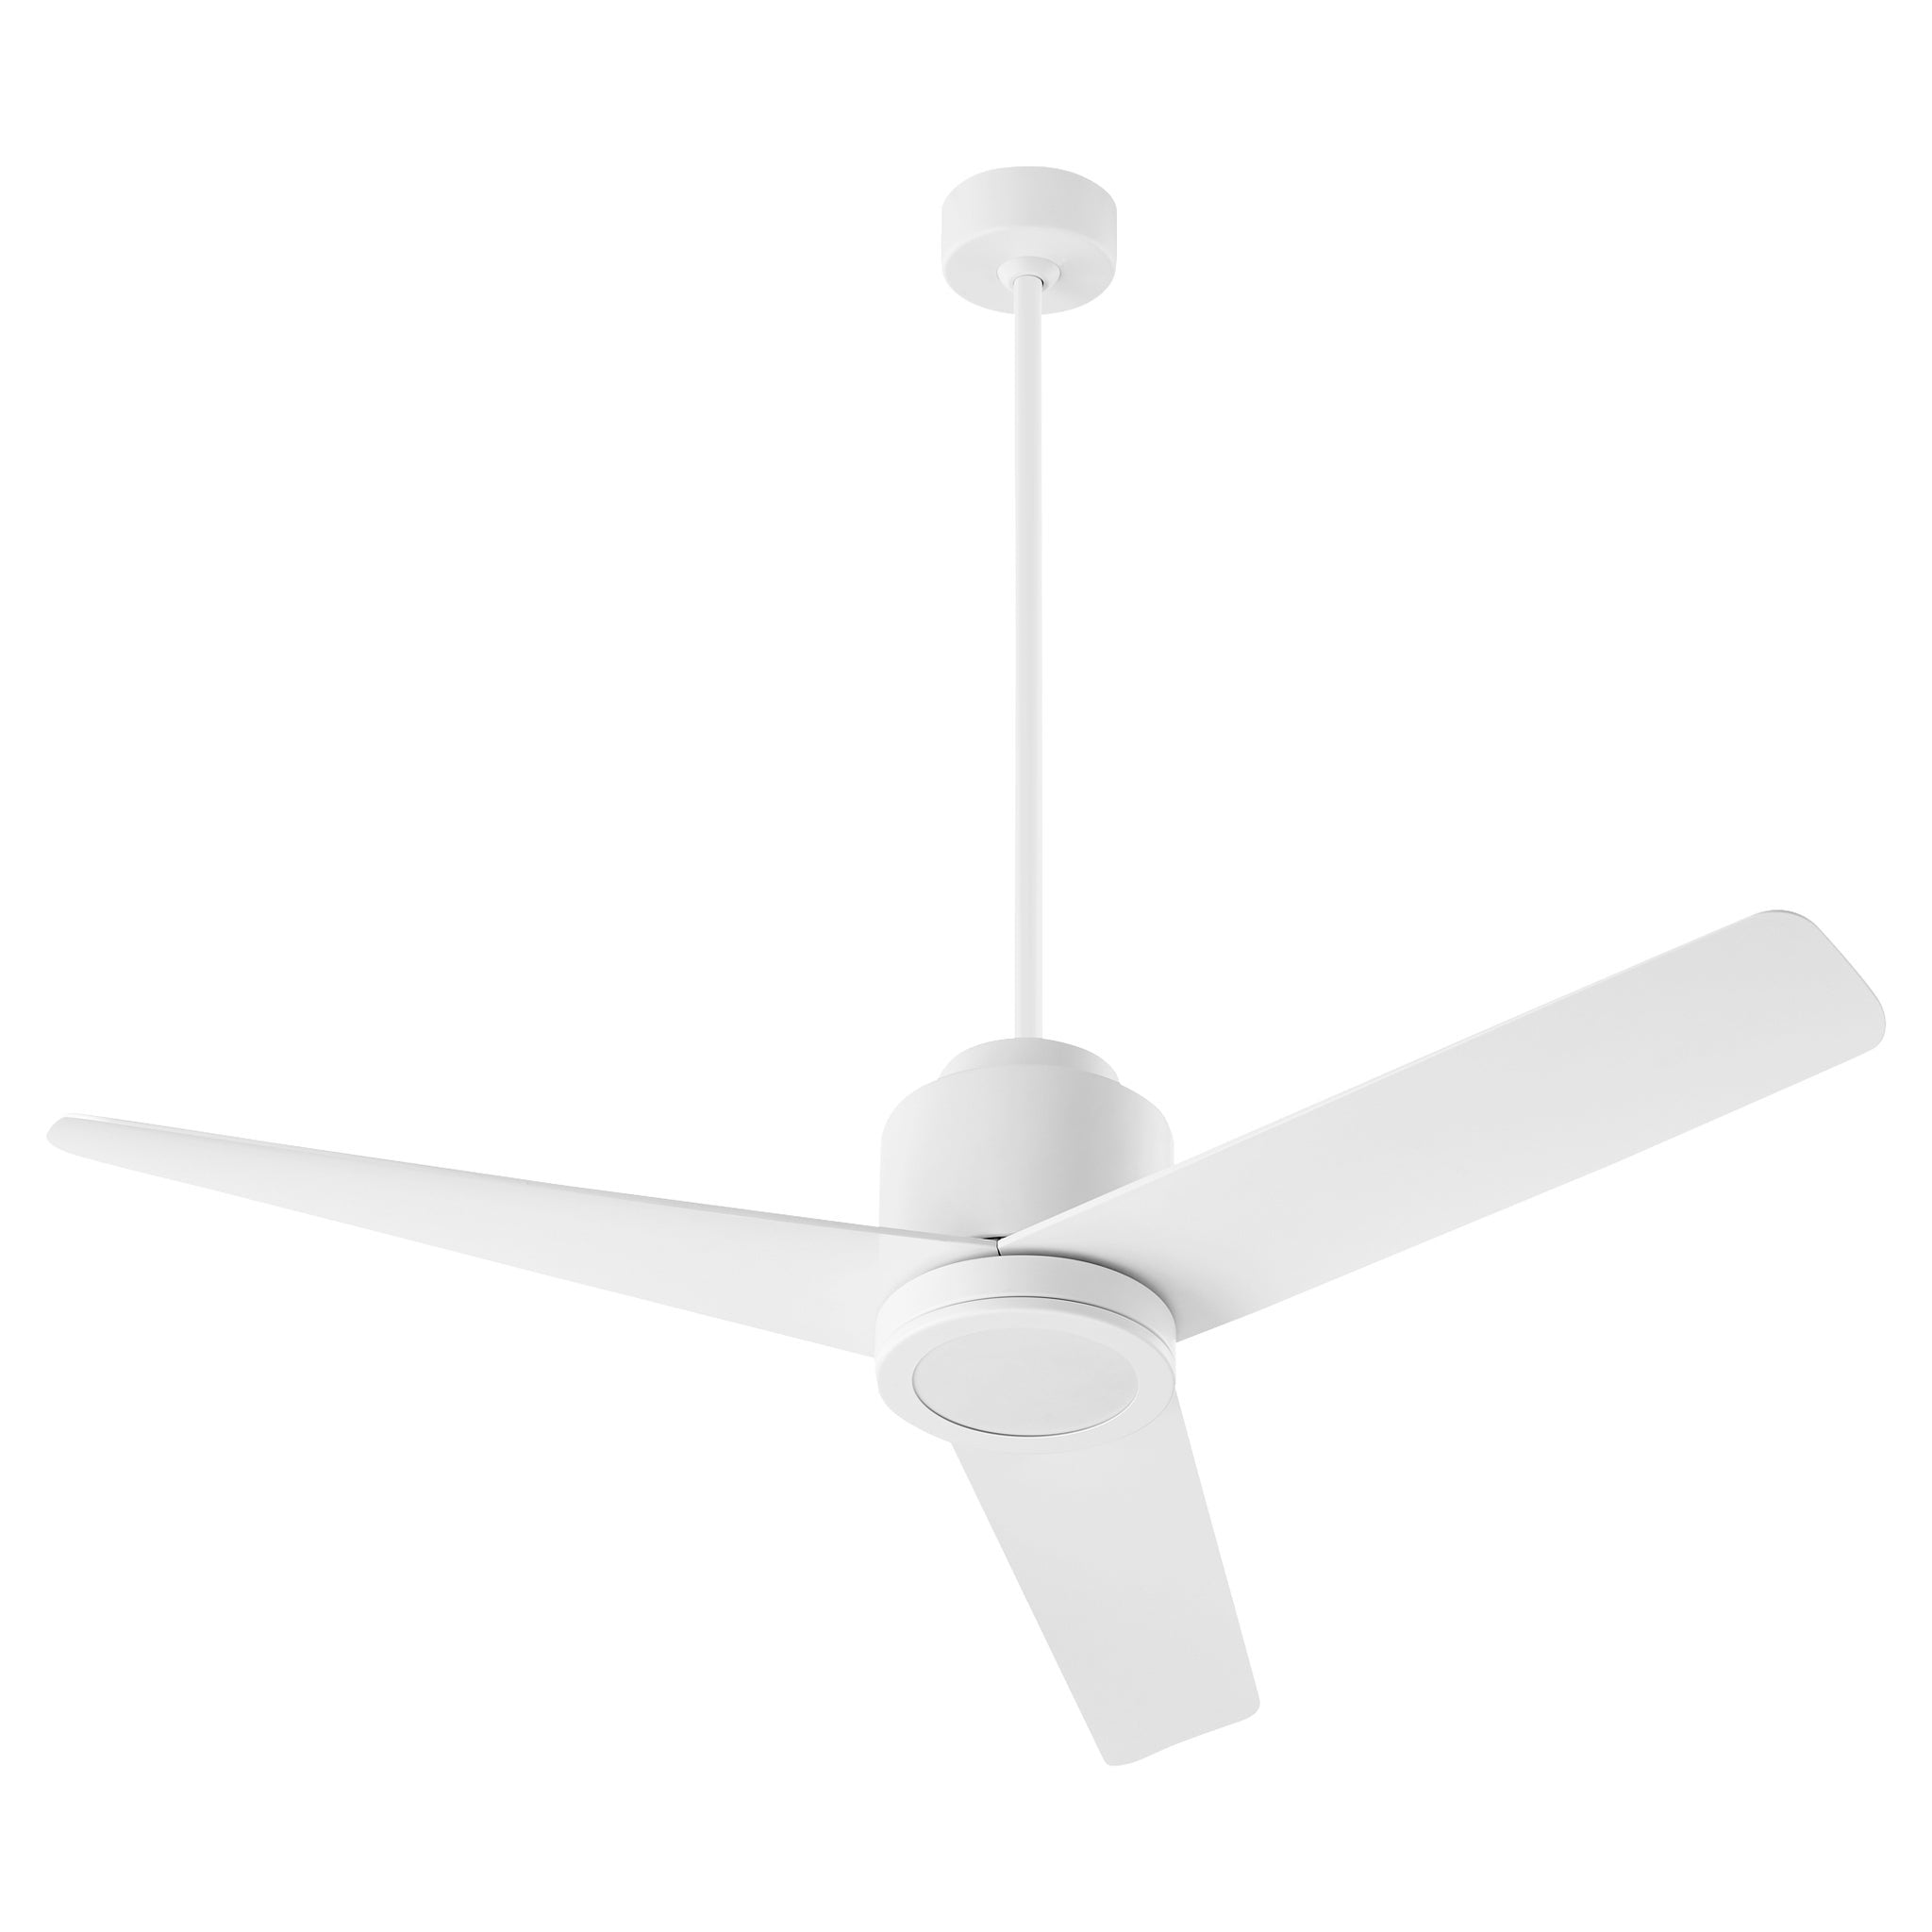 Oxygen ADORA Indoor or Outdoor Downrod Ceiling Fan, 52 Inch Blade Span, Wet Rated – Black, Satin Nickel, or White